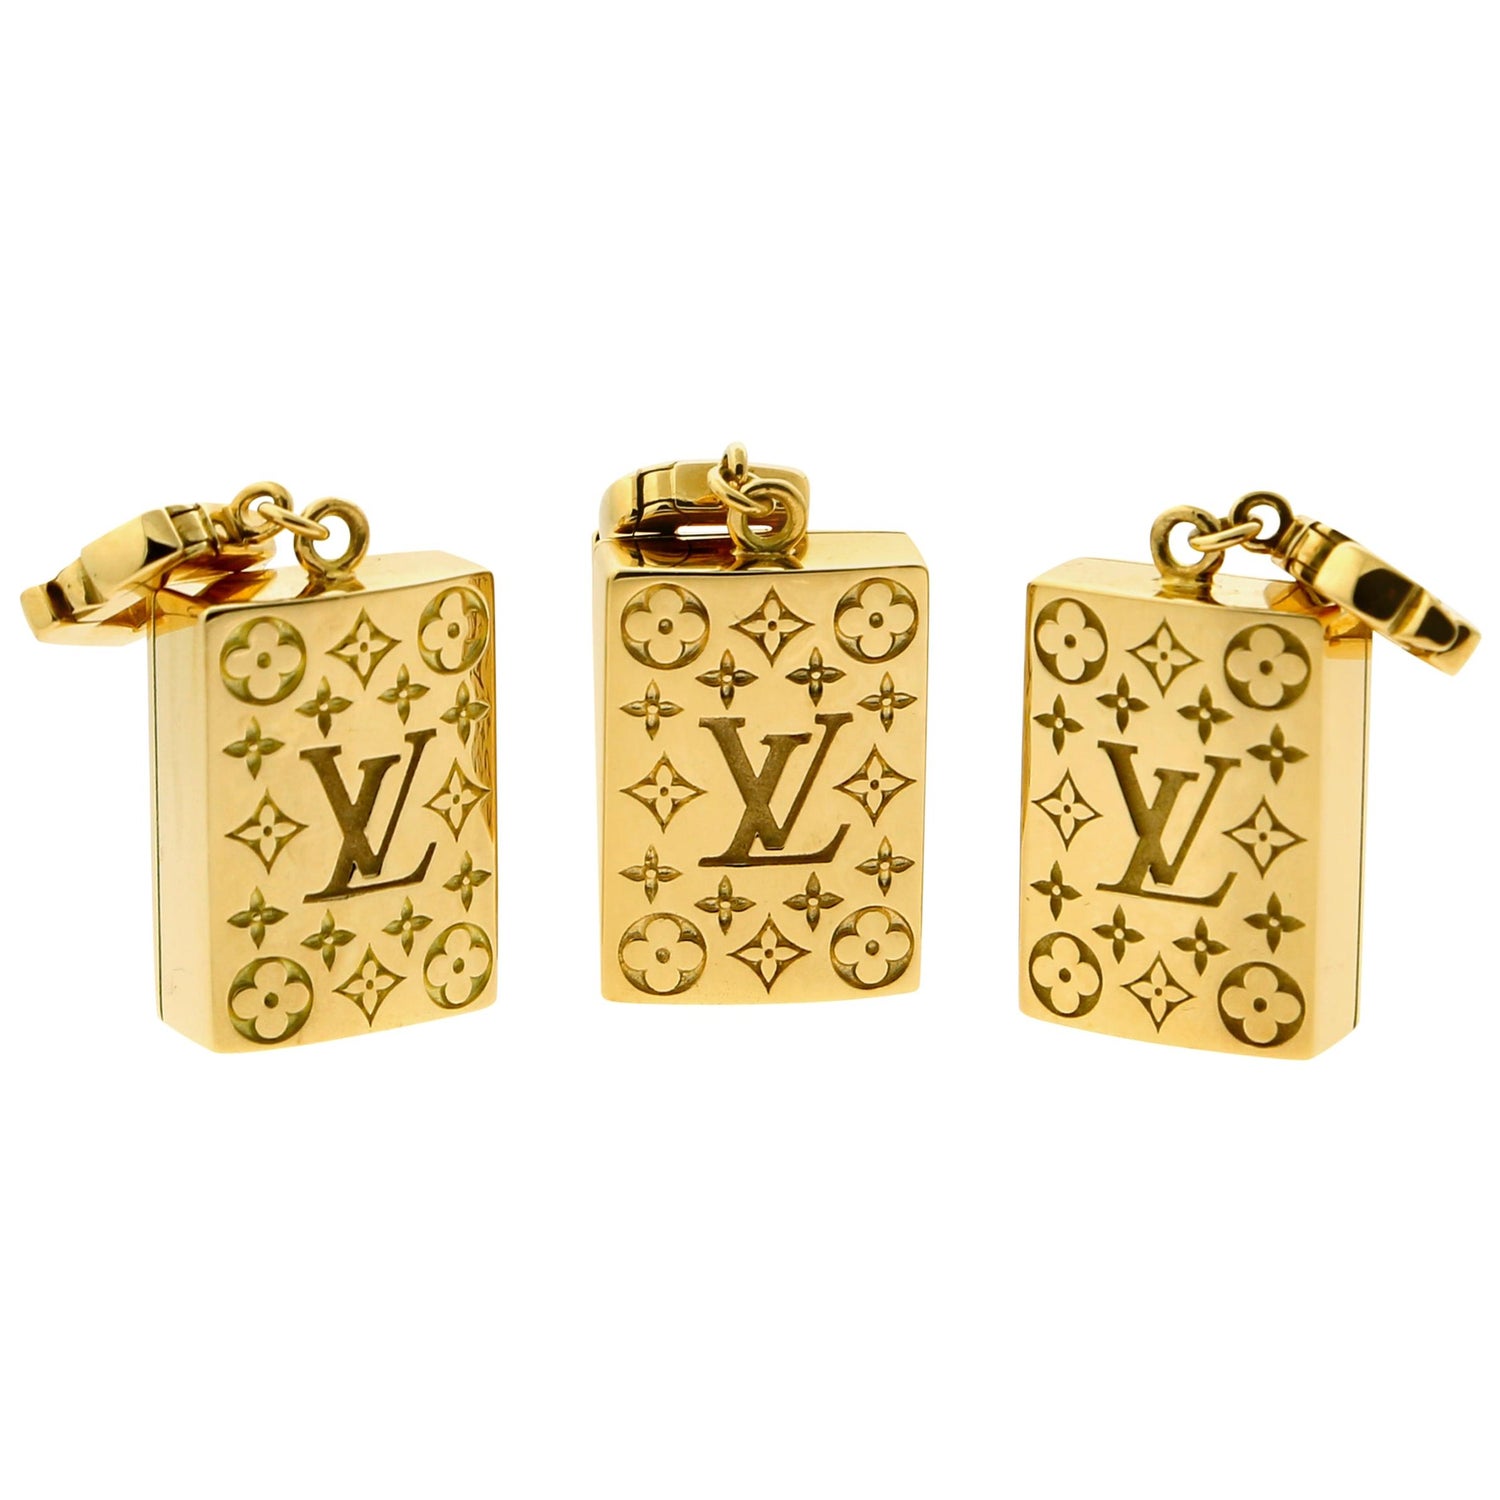 Monogram bracelet Louis Vuitton Gold in gold and steel - 31643770